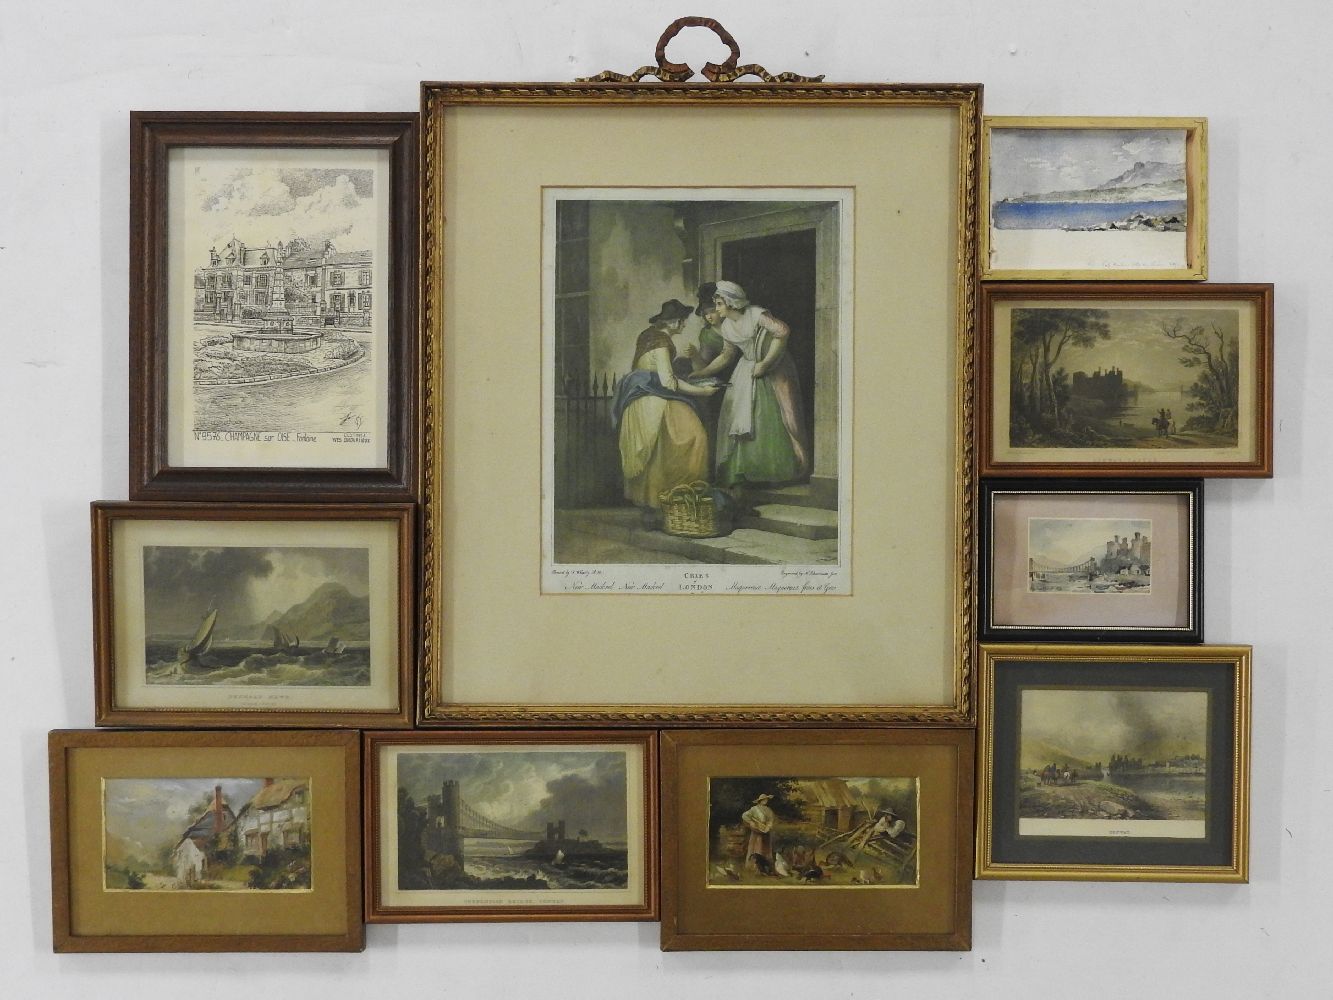 A 19th century mezzotint, and a collection on miniature paintings and prints